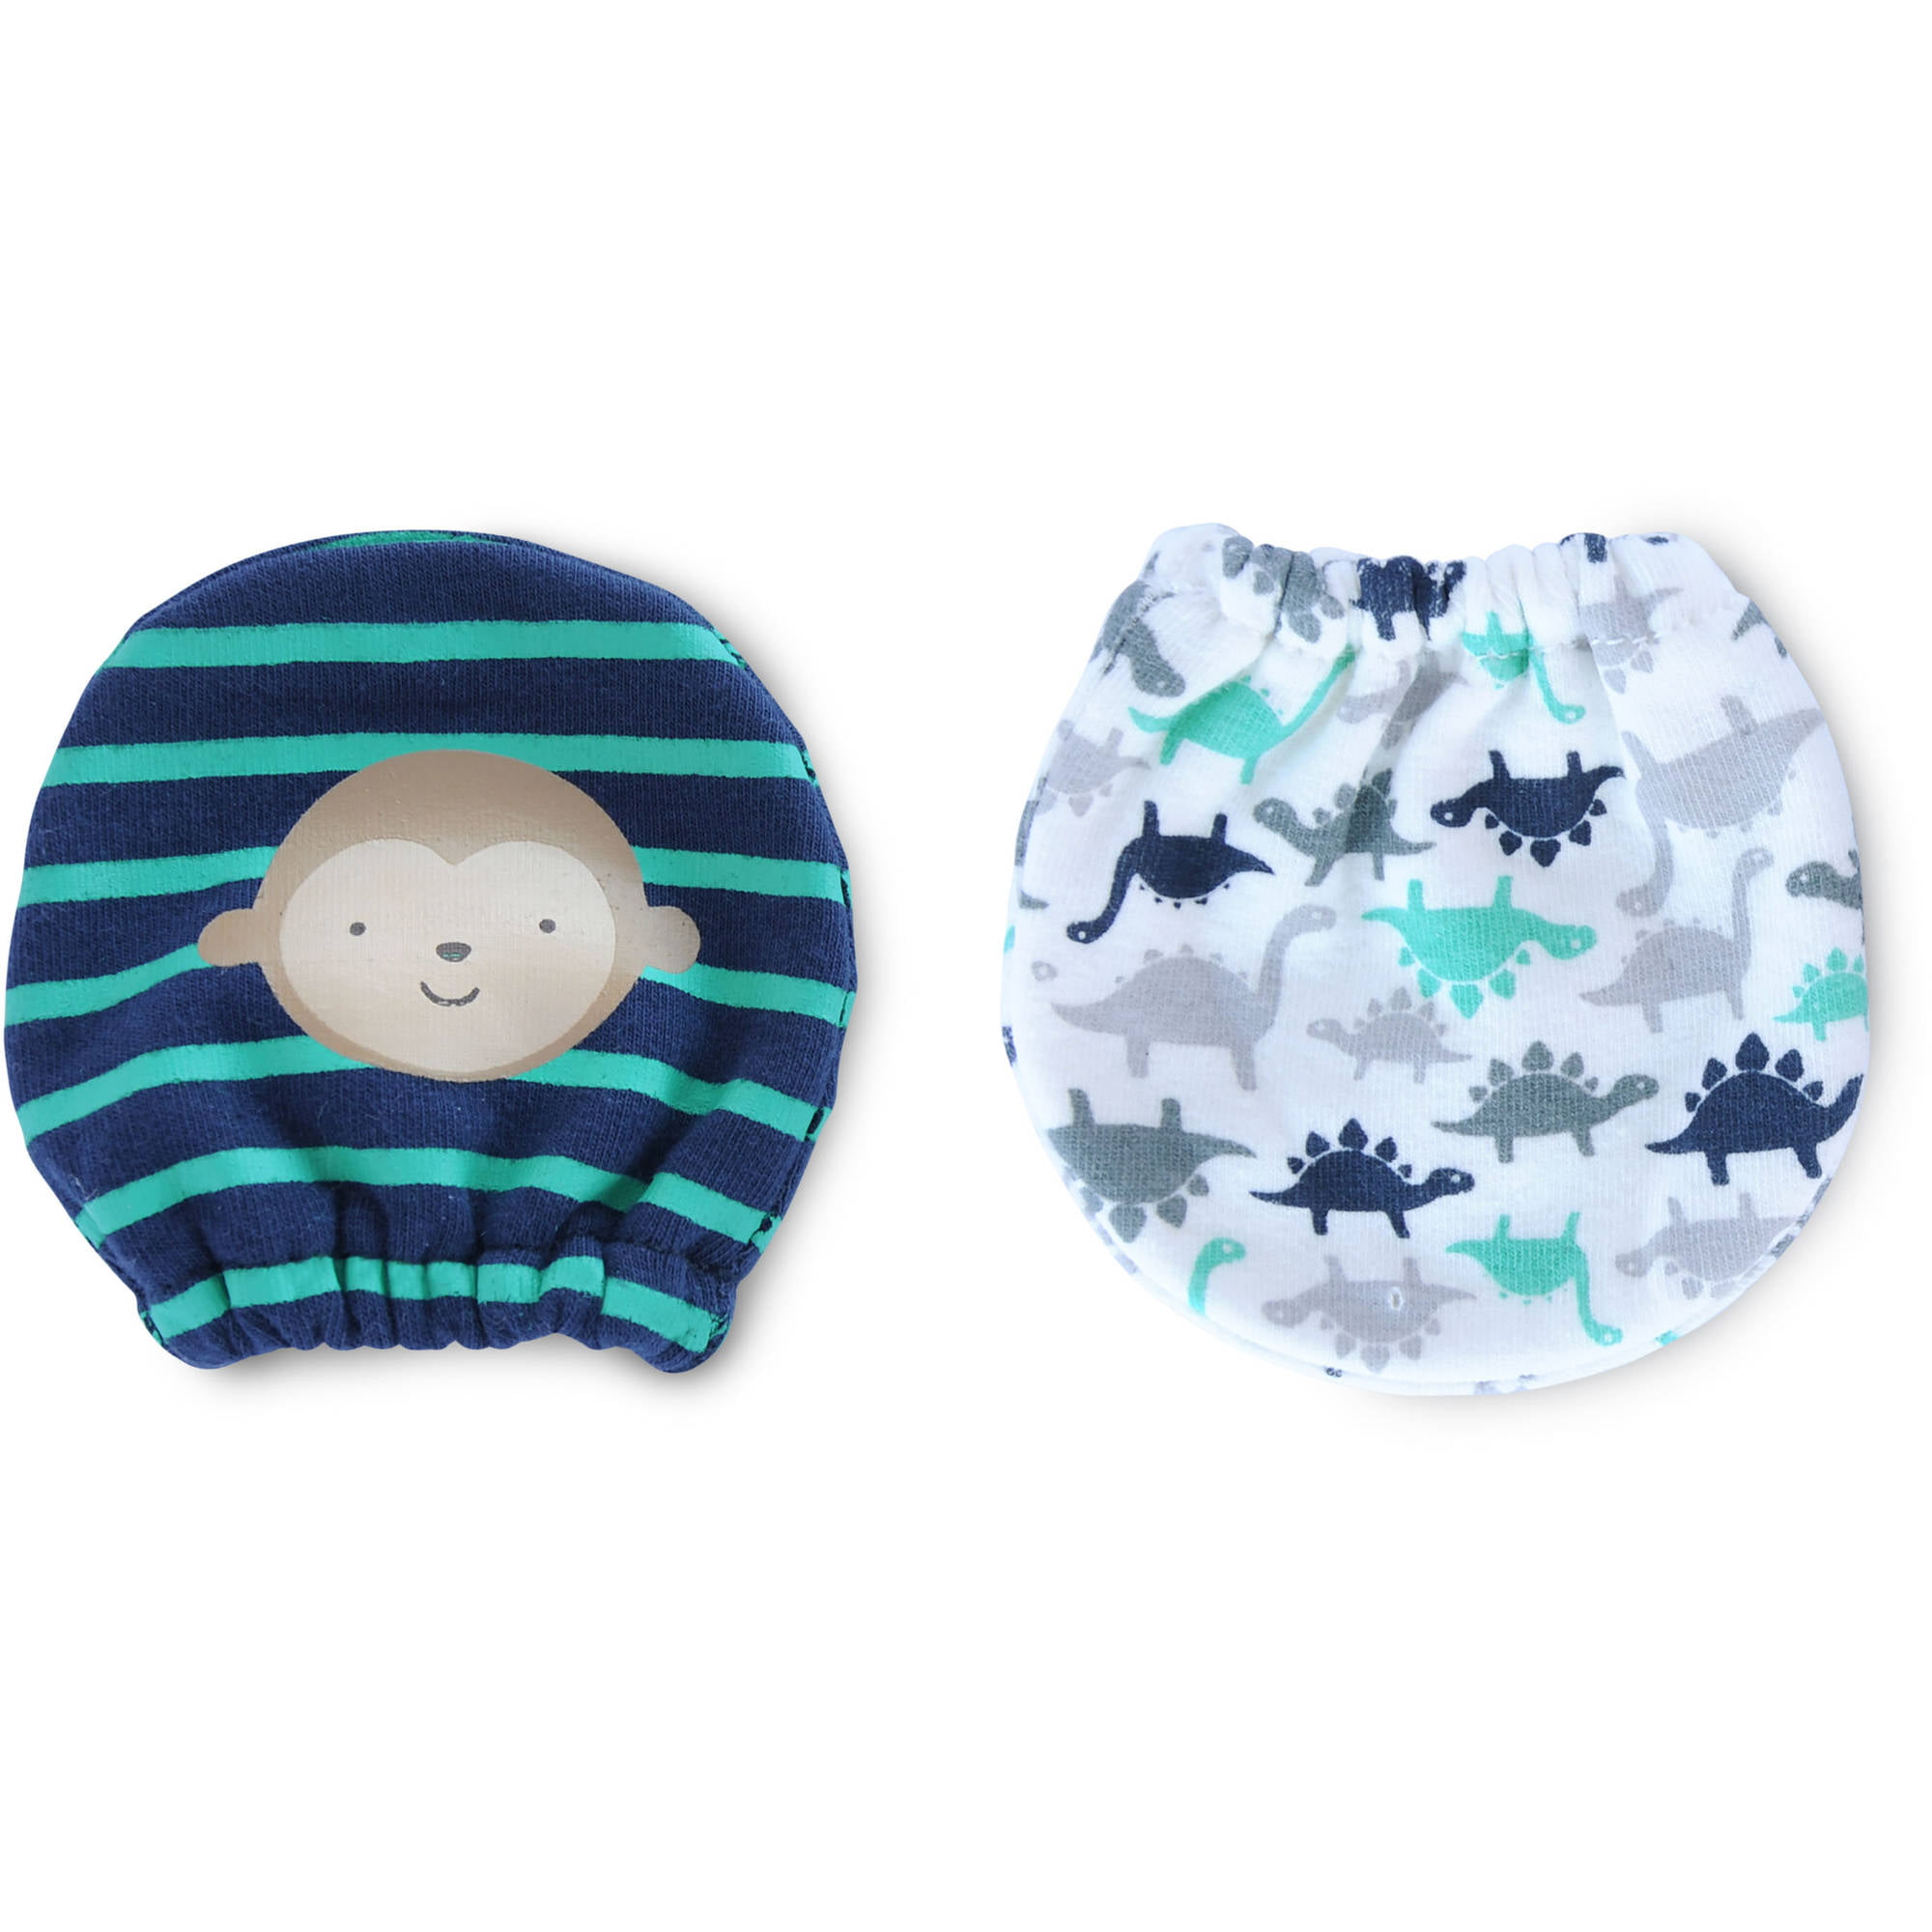 baby mittens for boys